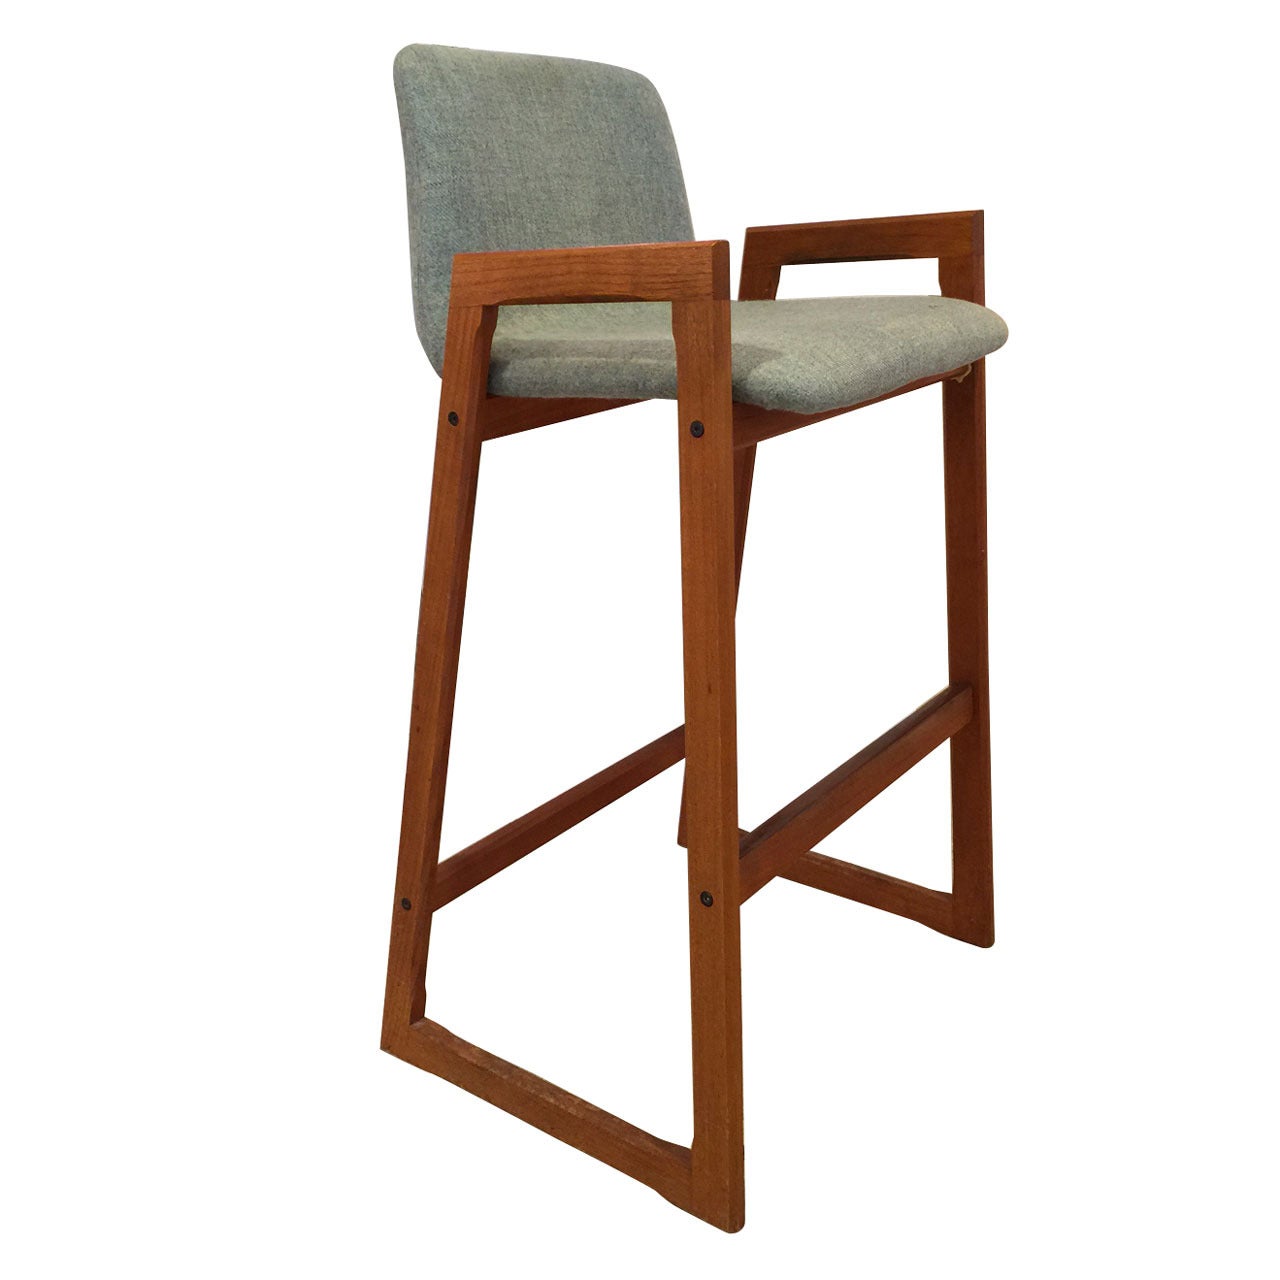 Vintage Danish Teak Bar Stool with Arms For Sale